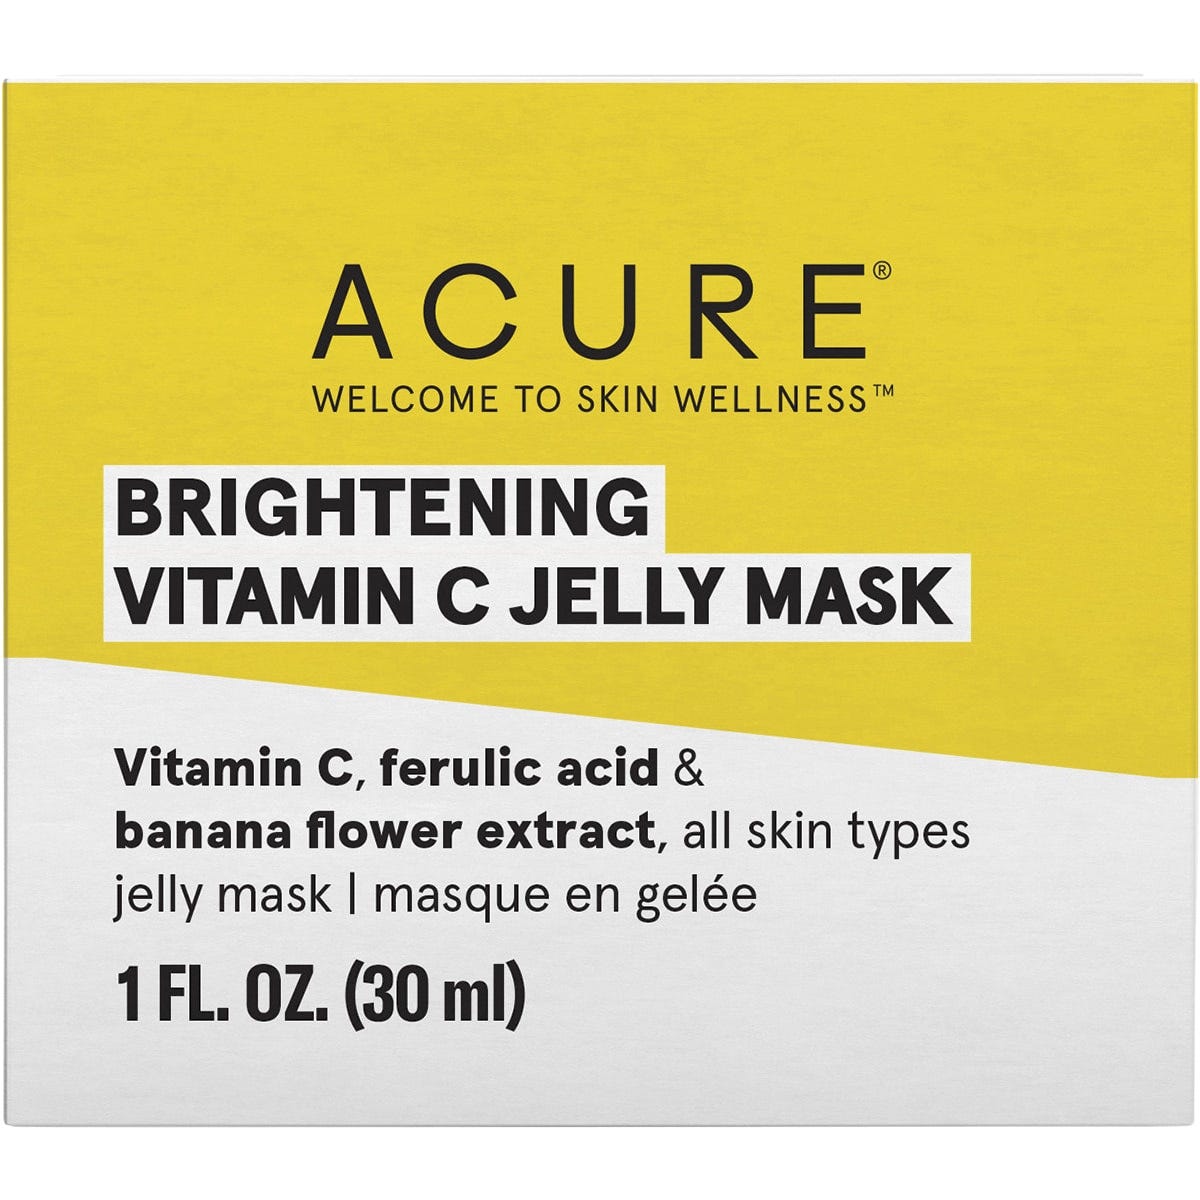 Acure Brightening Vitamin C Jelly Mask